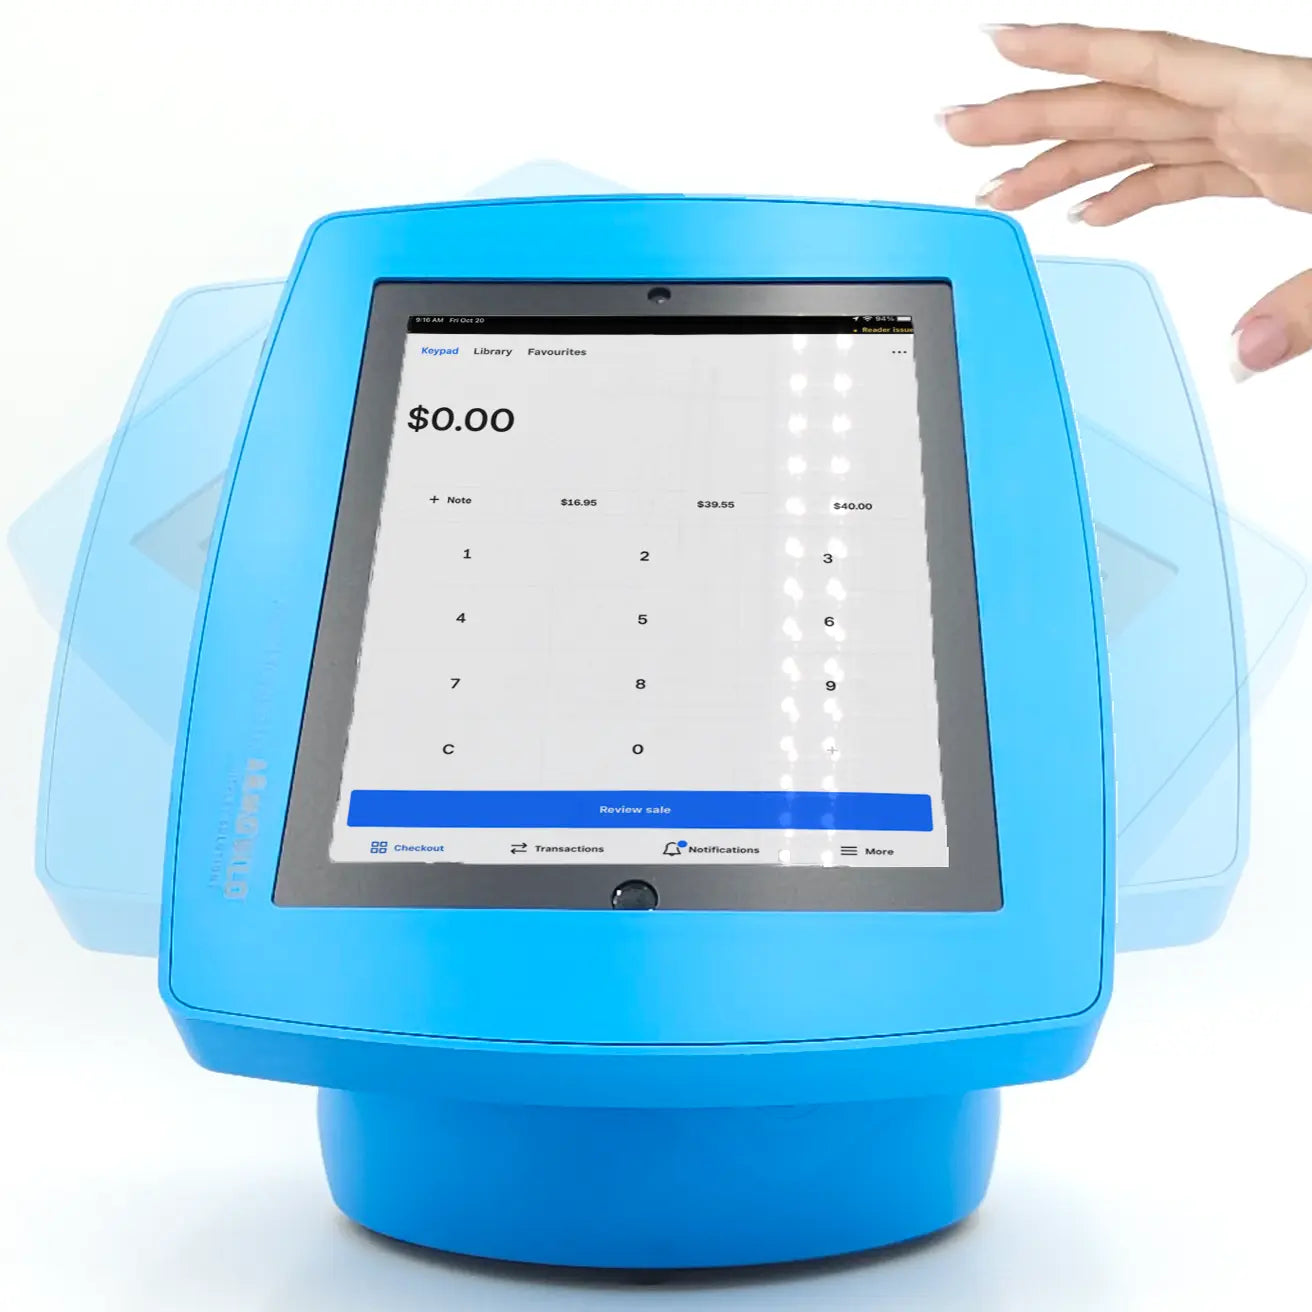 The front interface of the blue sphere iPad tablet kiosk.